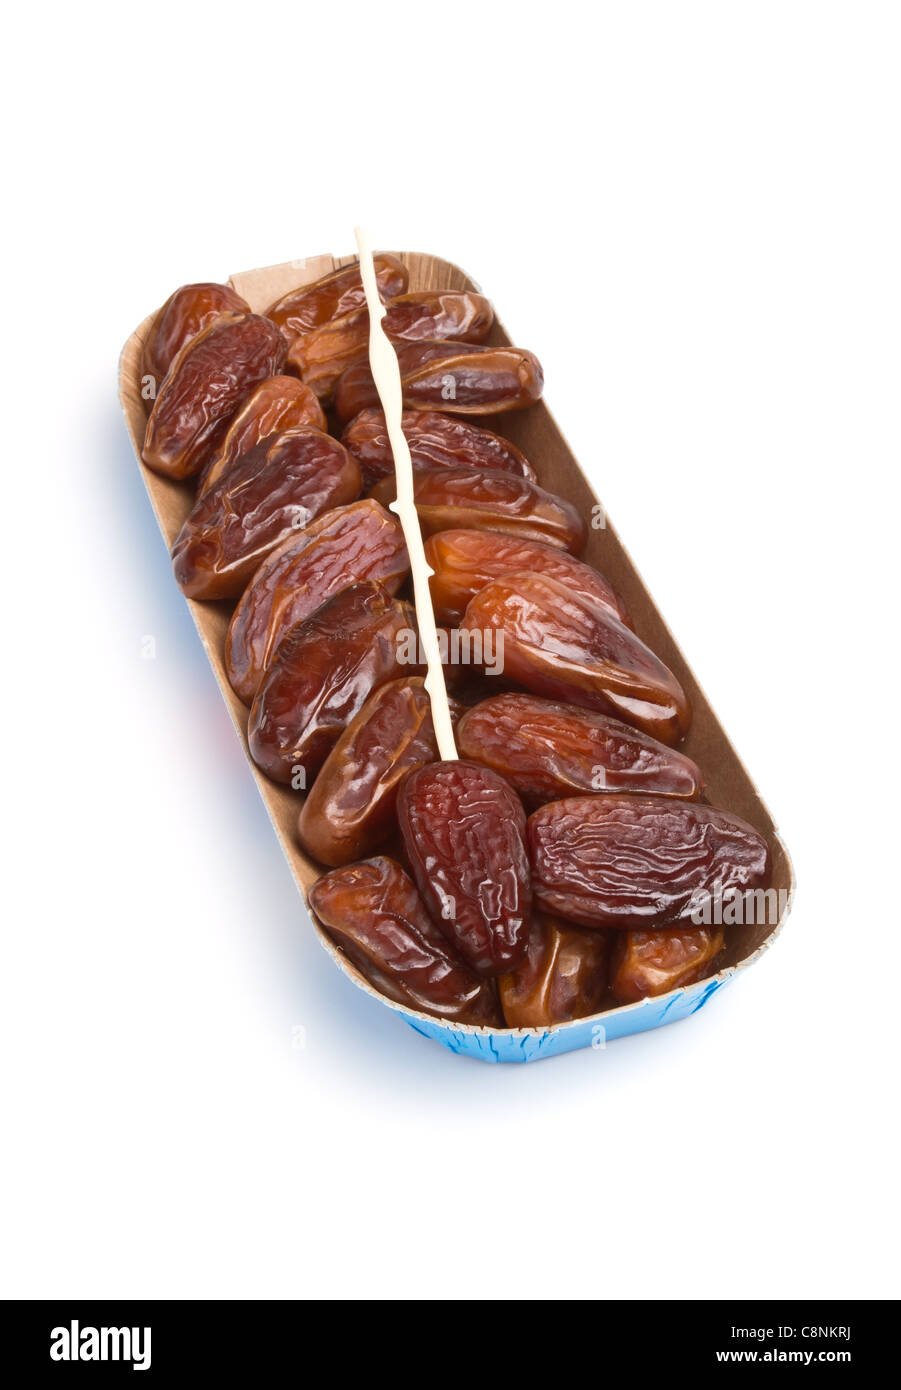 Cardboard tray of date fruits with skewer on white background. Stock Photo